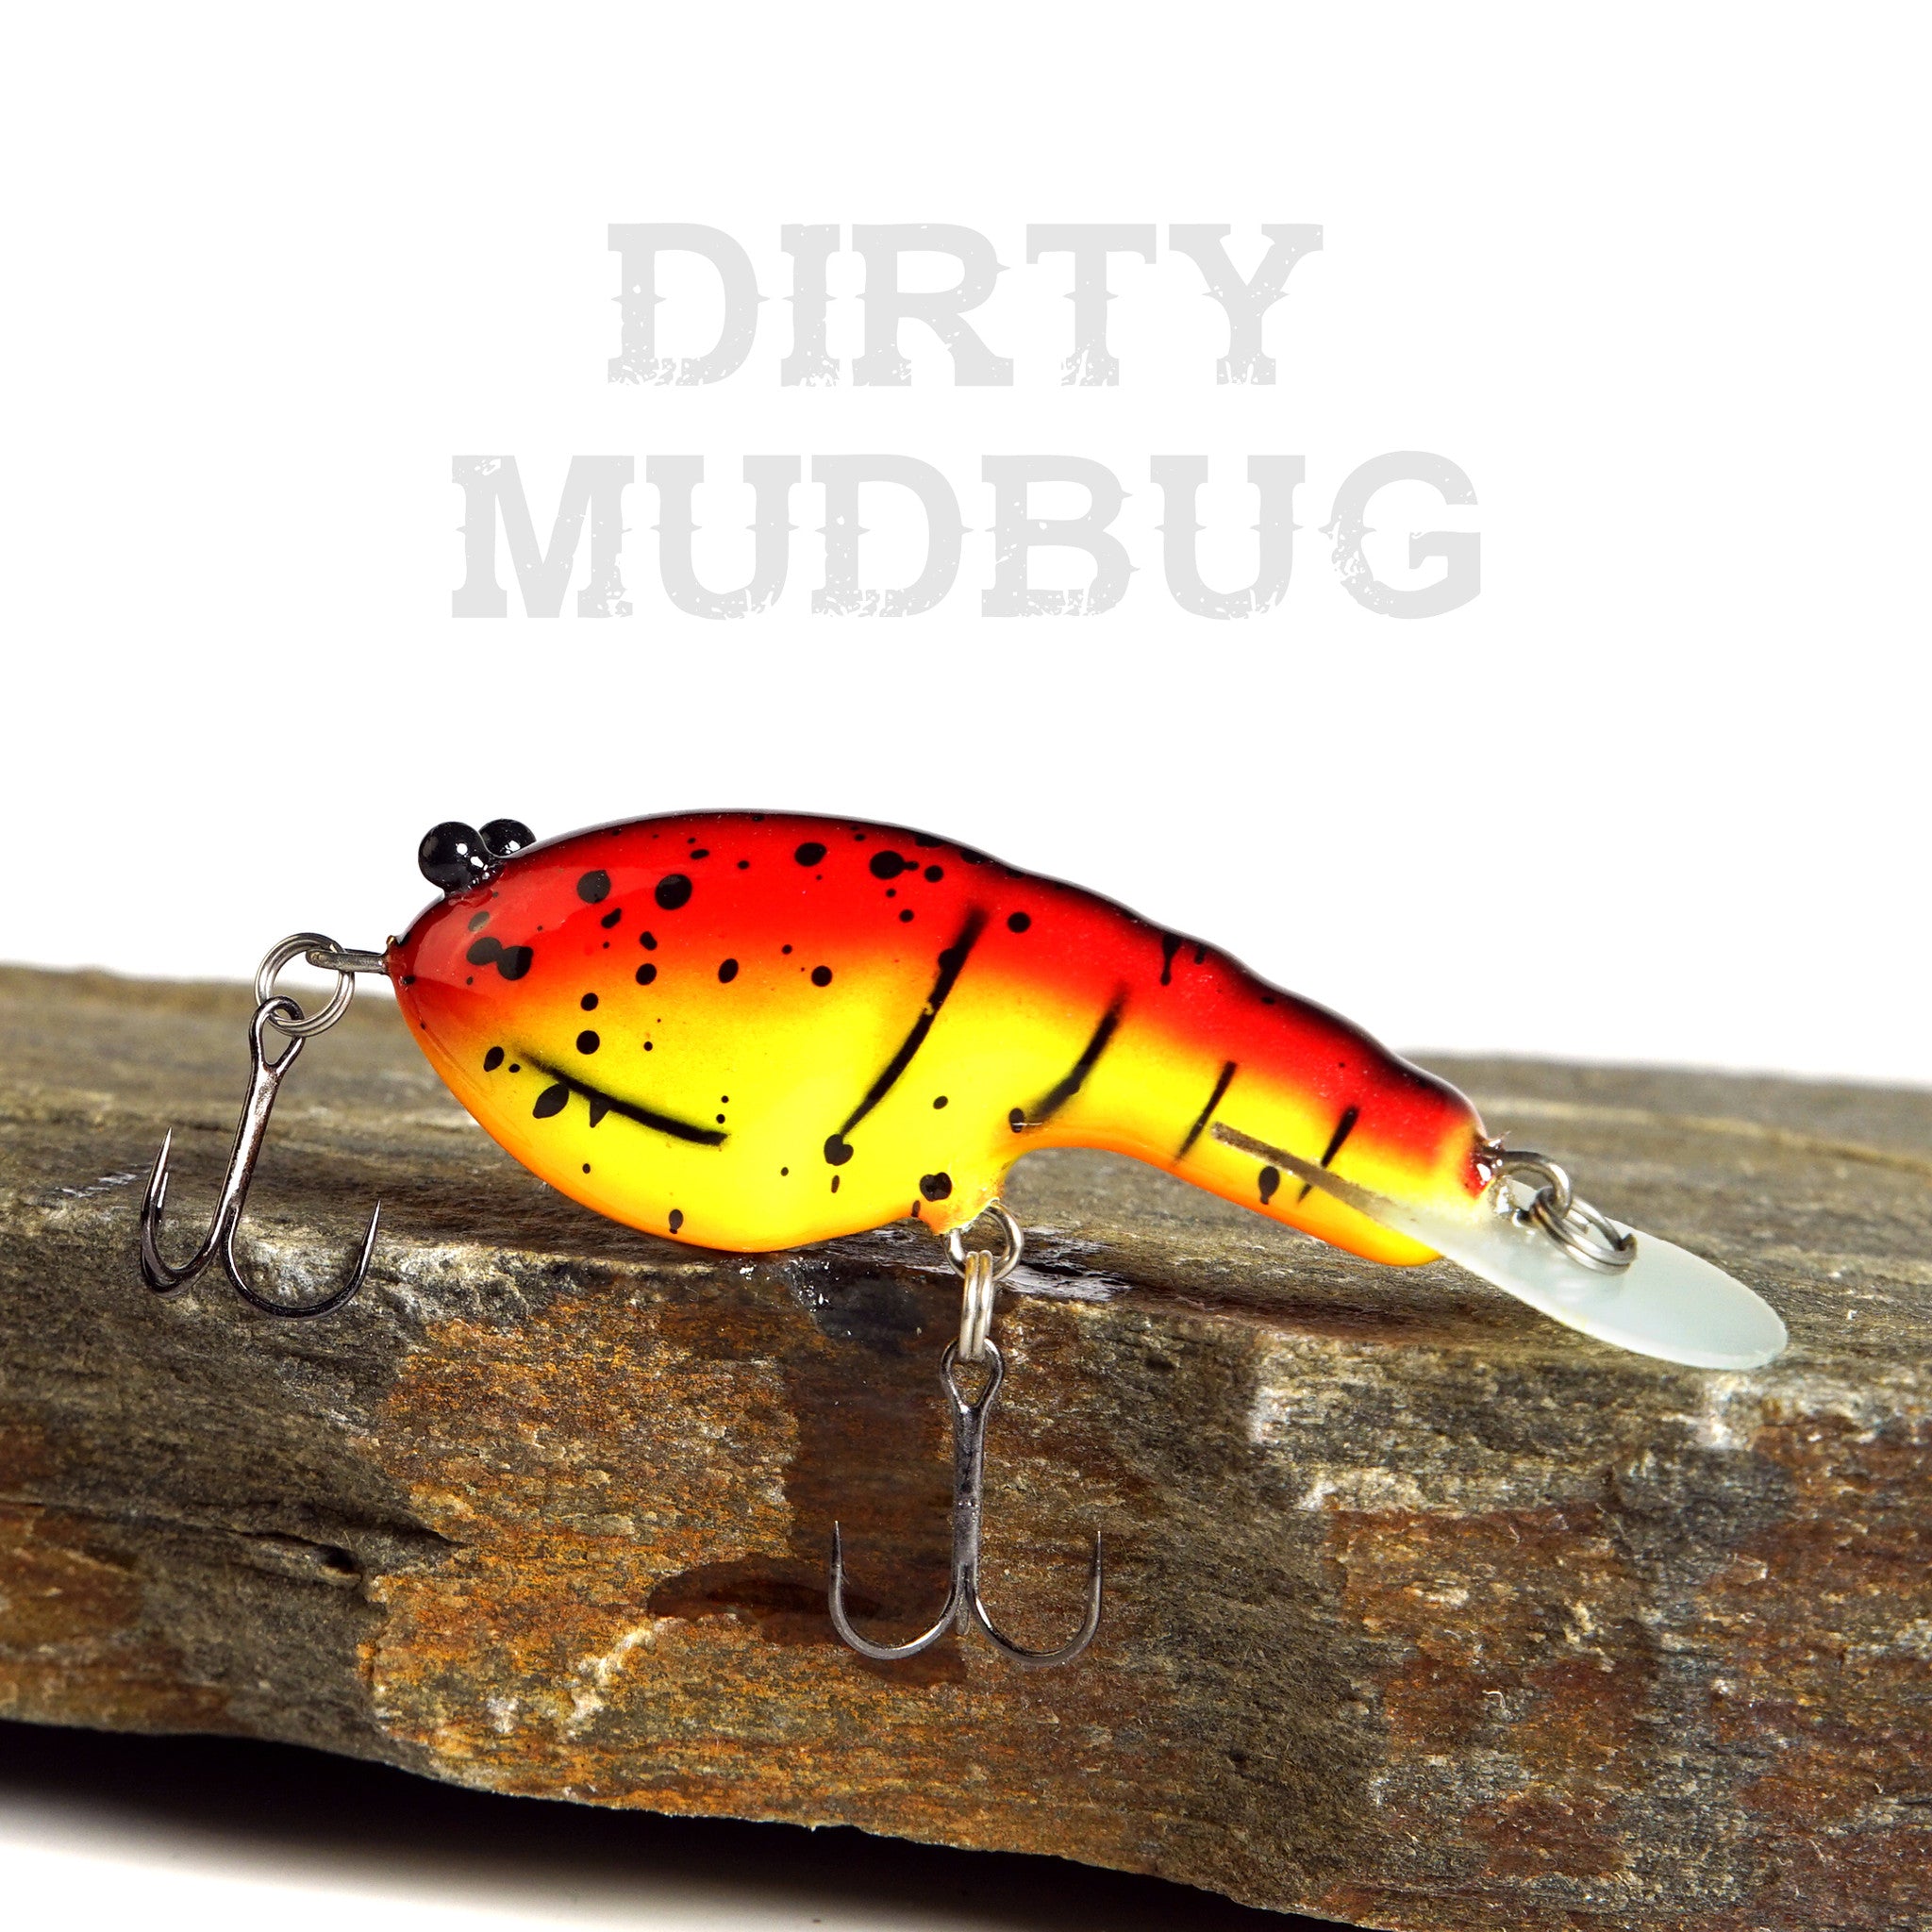 PH Custom Lures Lowen's Cyber Craw Crankbait Product Review